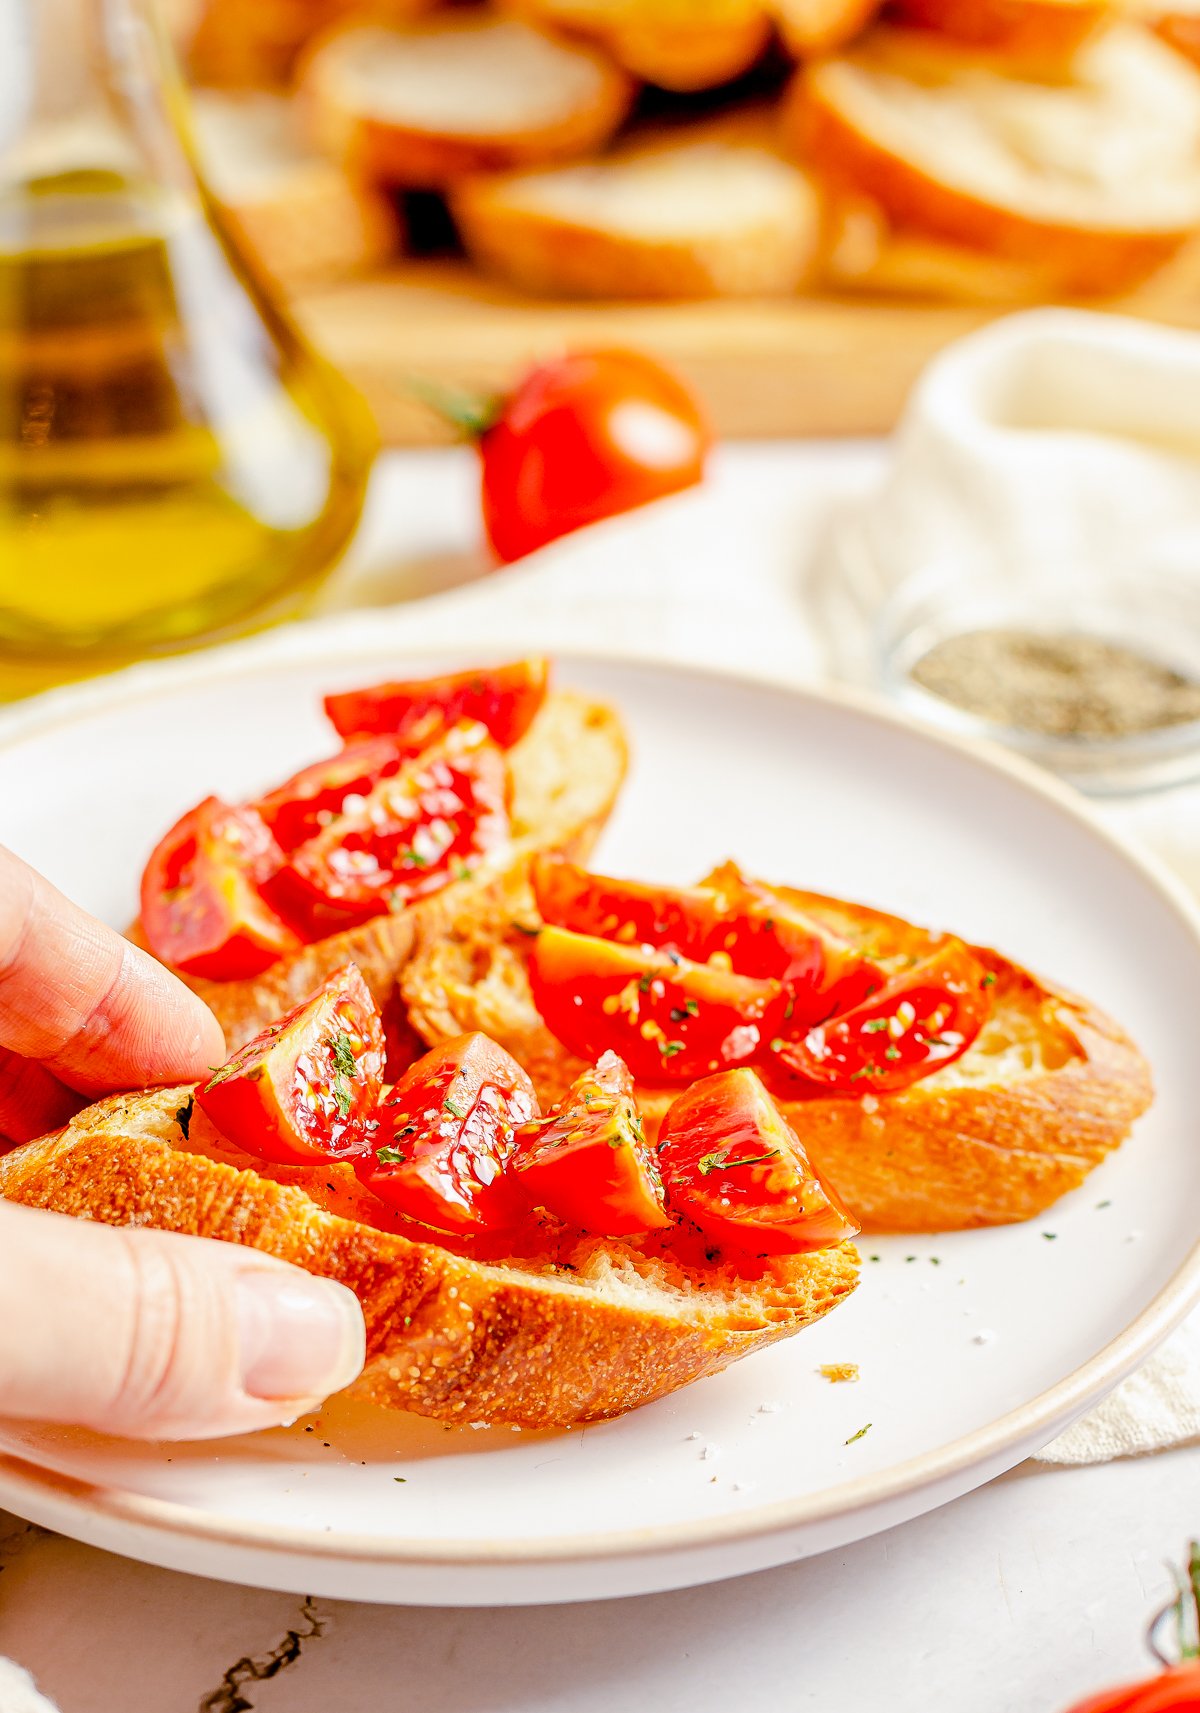 Hand putting a piece of Crostini Recipe on plate with tomatoes.